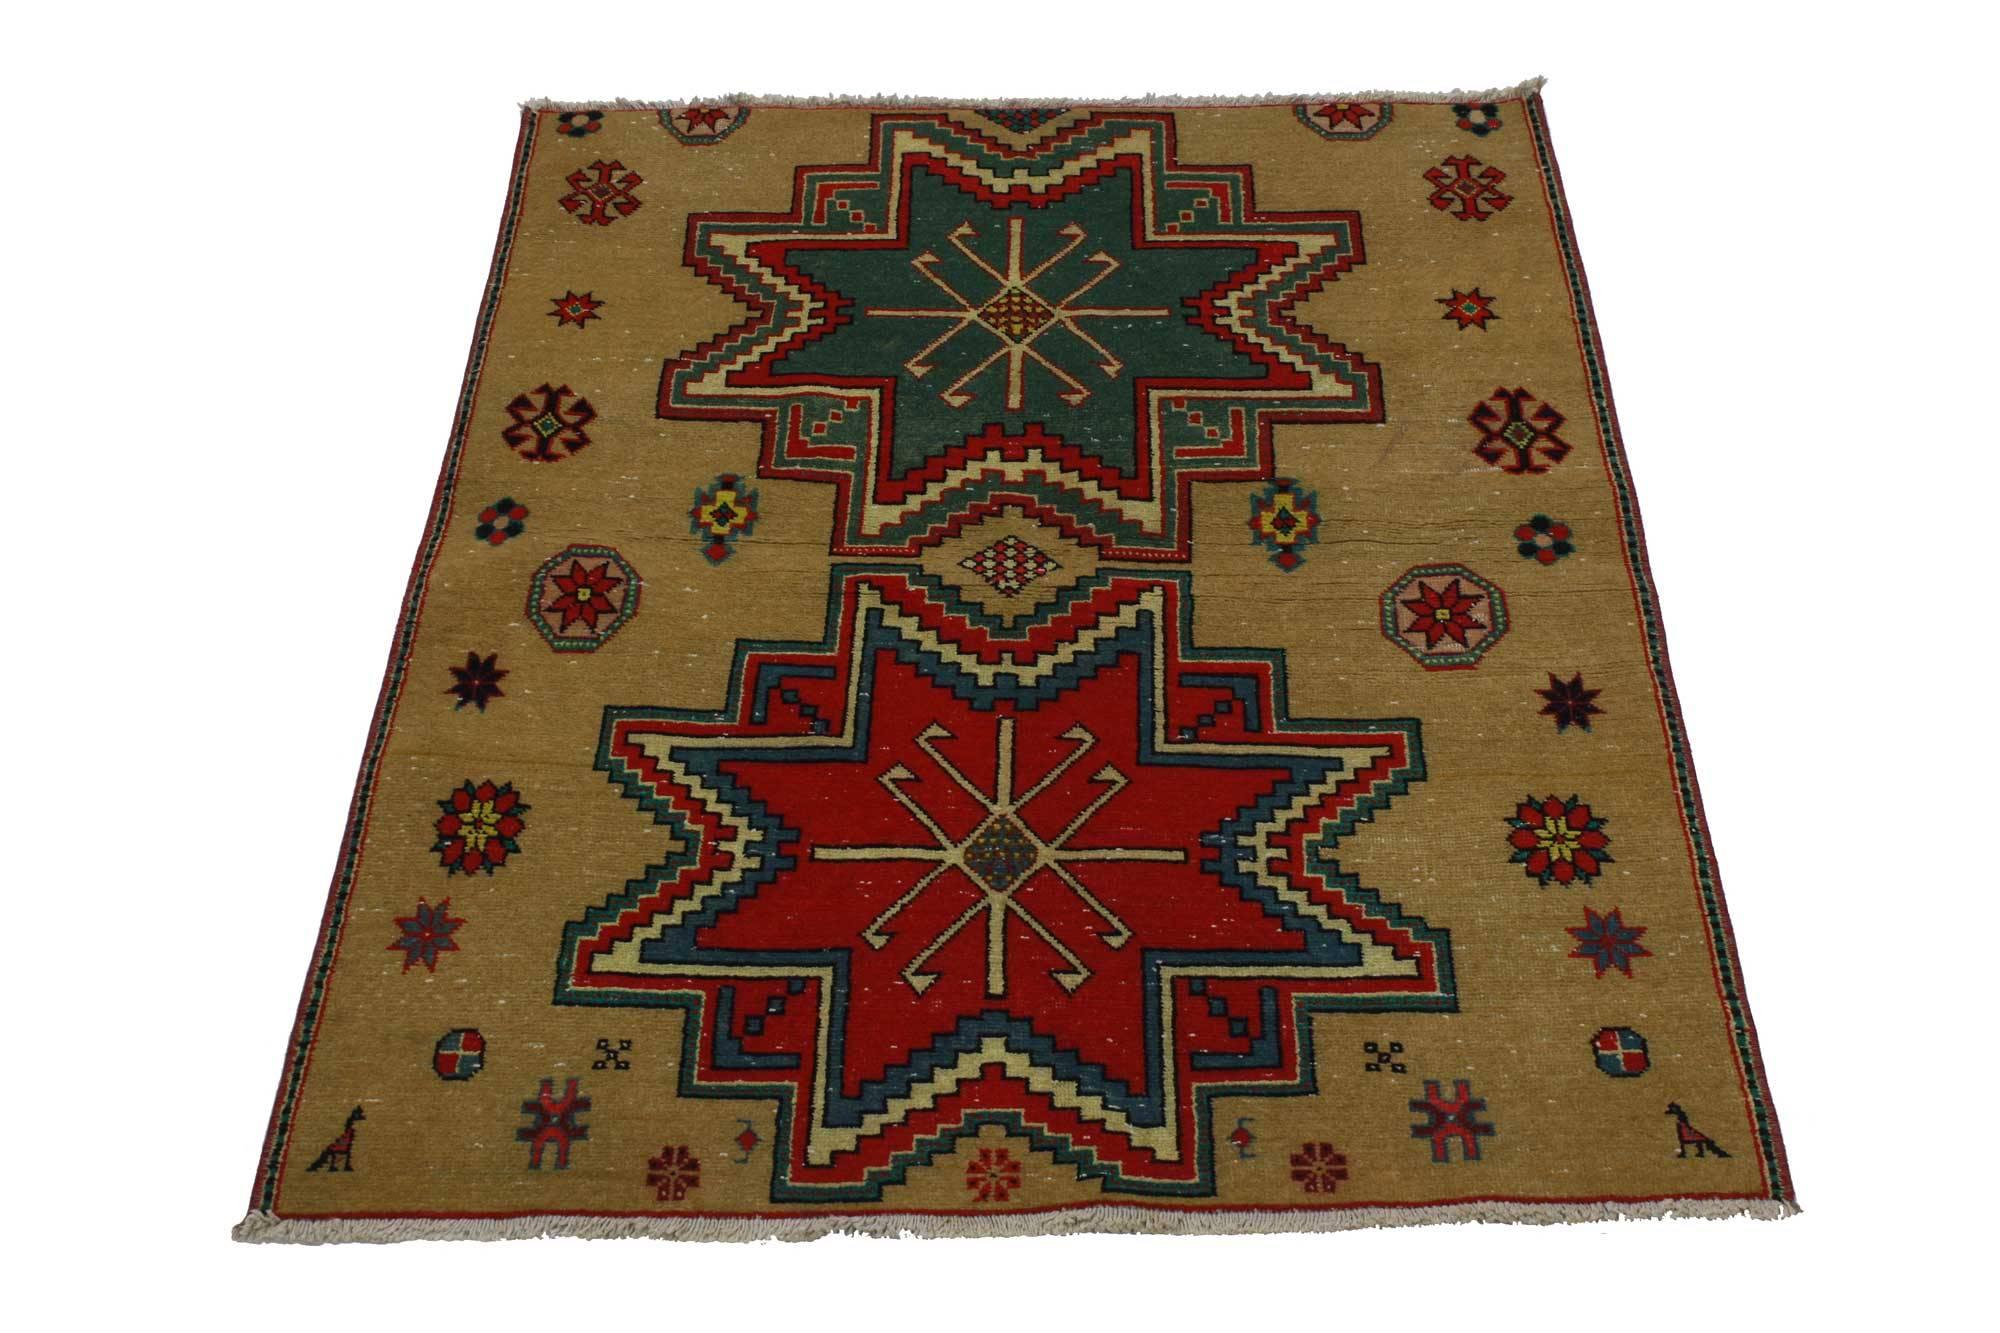 51772, vintage Turkish Oushak rug, tribal rug for kitchen, bath, foyer or entryway. This hand-knotted wool vintage Turkish Oushak rug features a modern traditional style. Immersed in Anatolian history and refined colors, this vintage Oushak rug